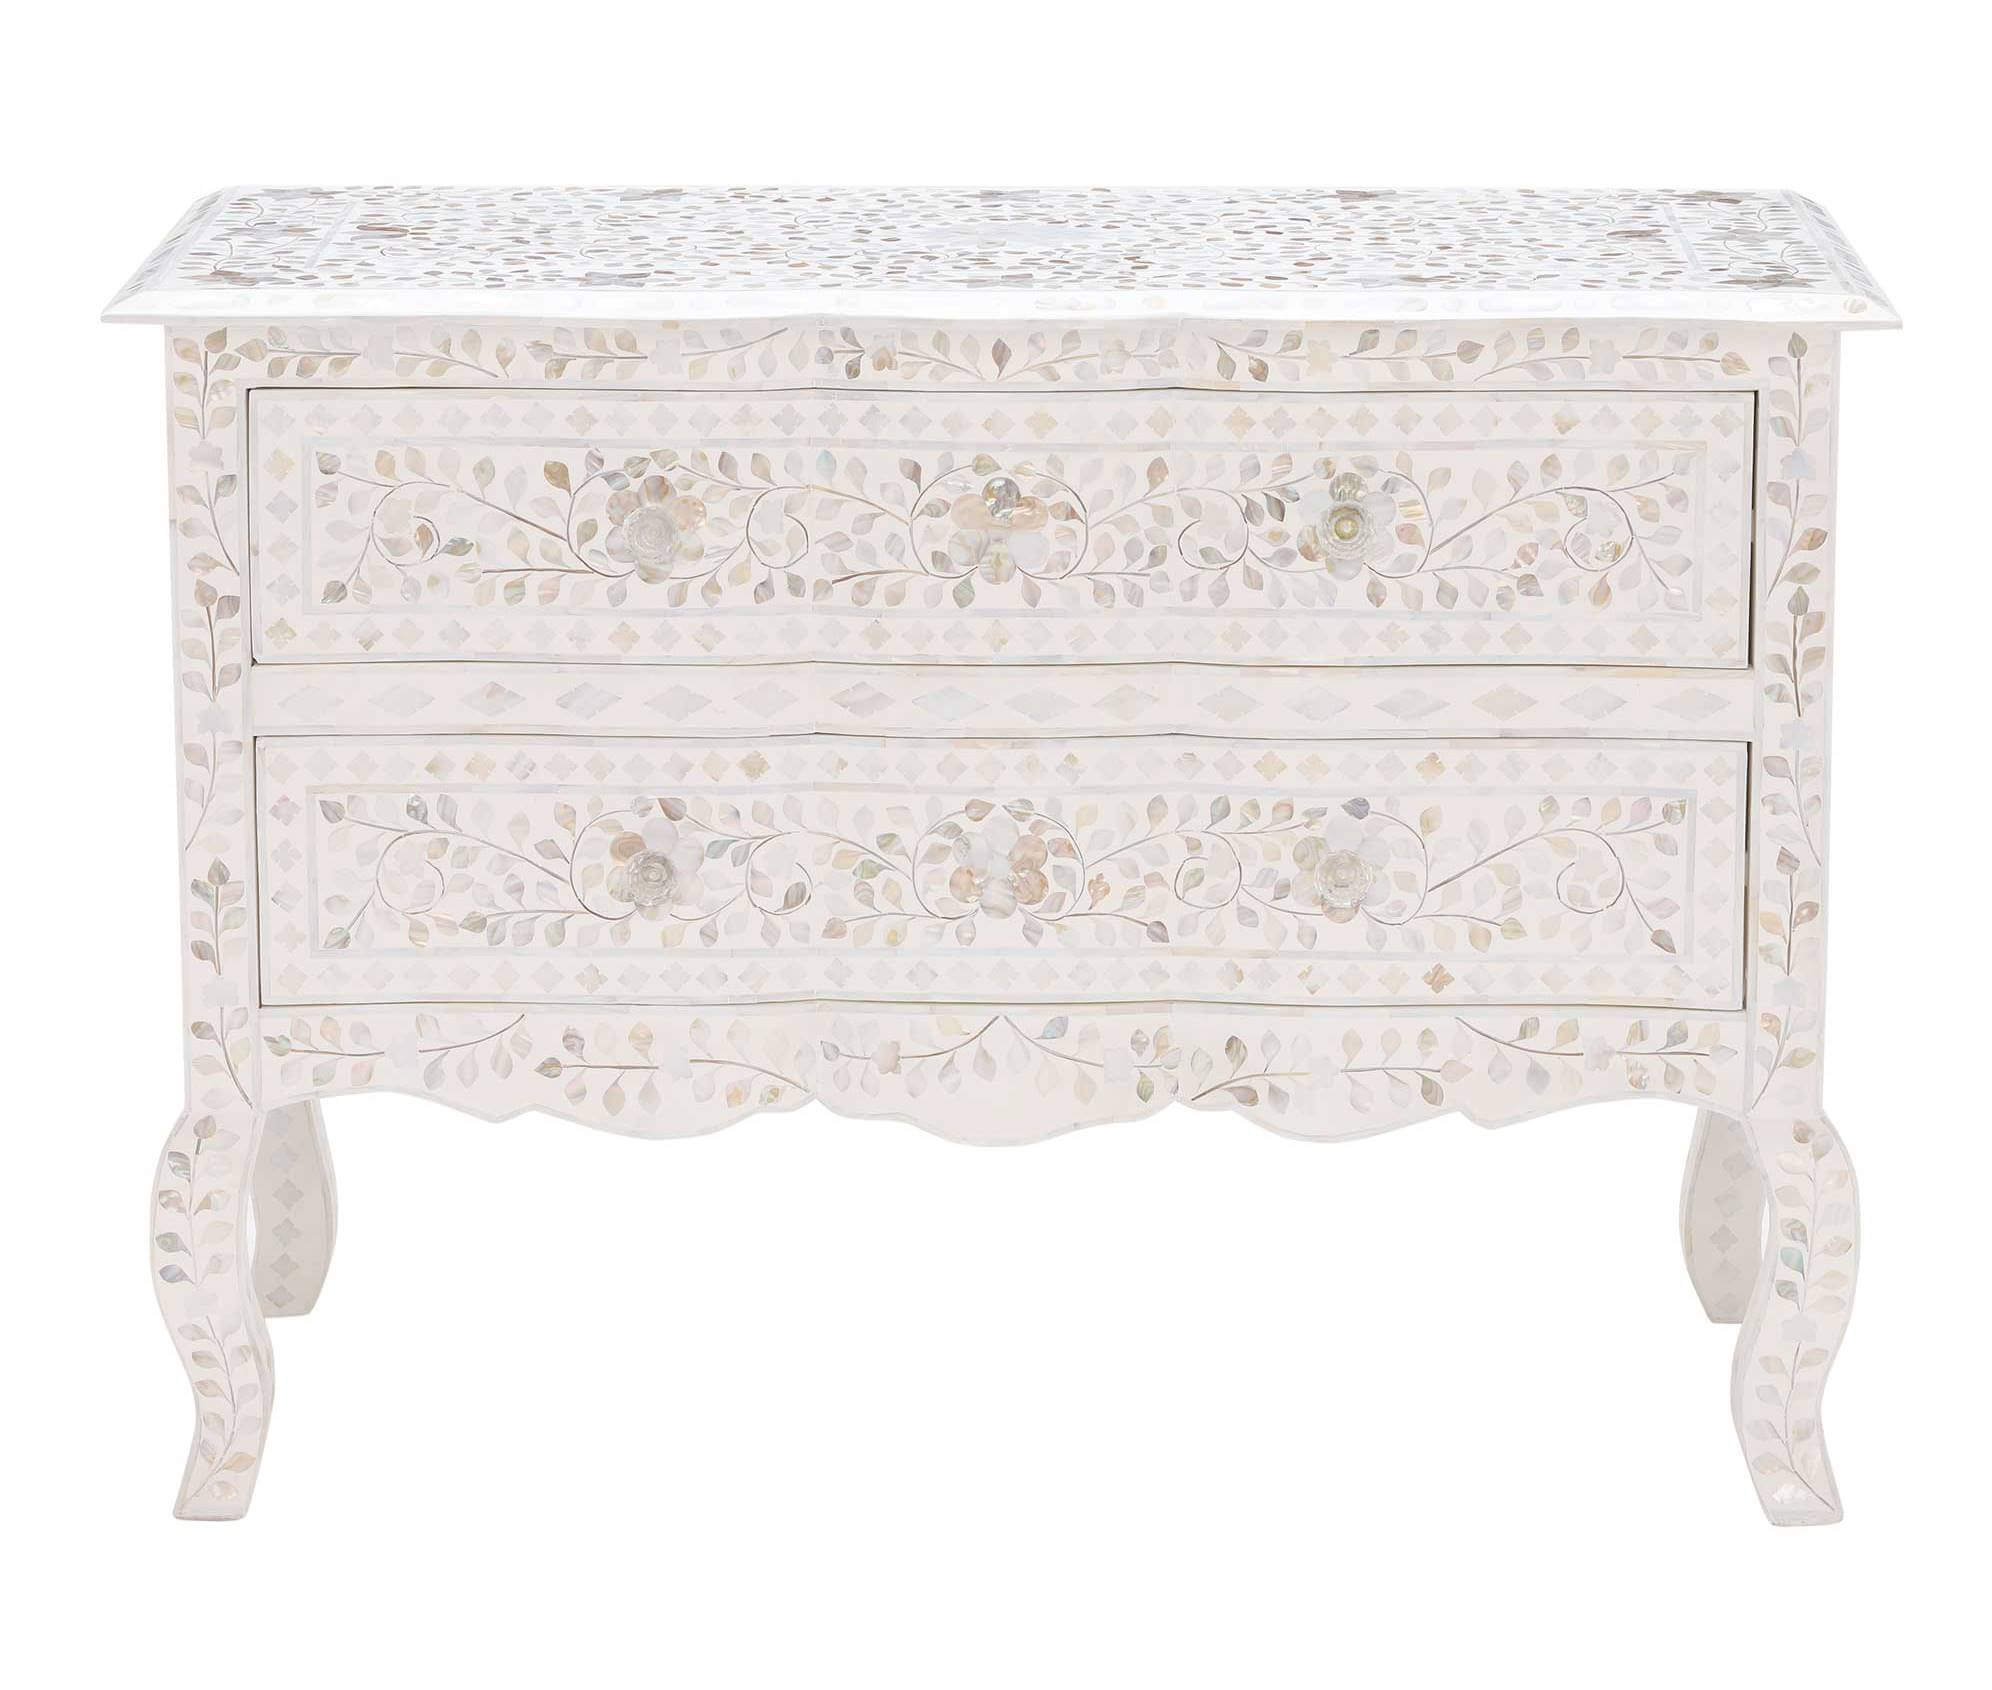 Mother Of Pearl Inlay Chest 2 Curved Drawer Floral Design White